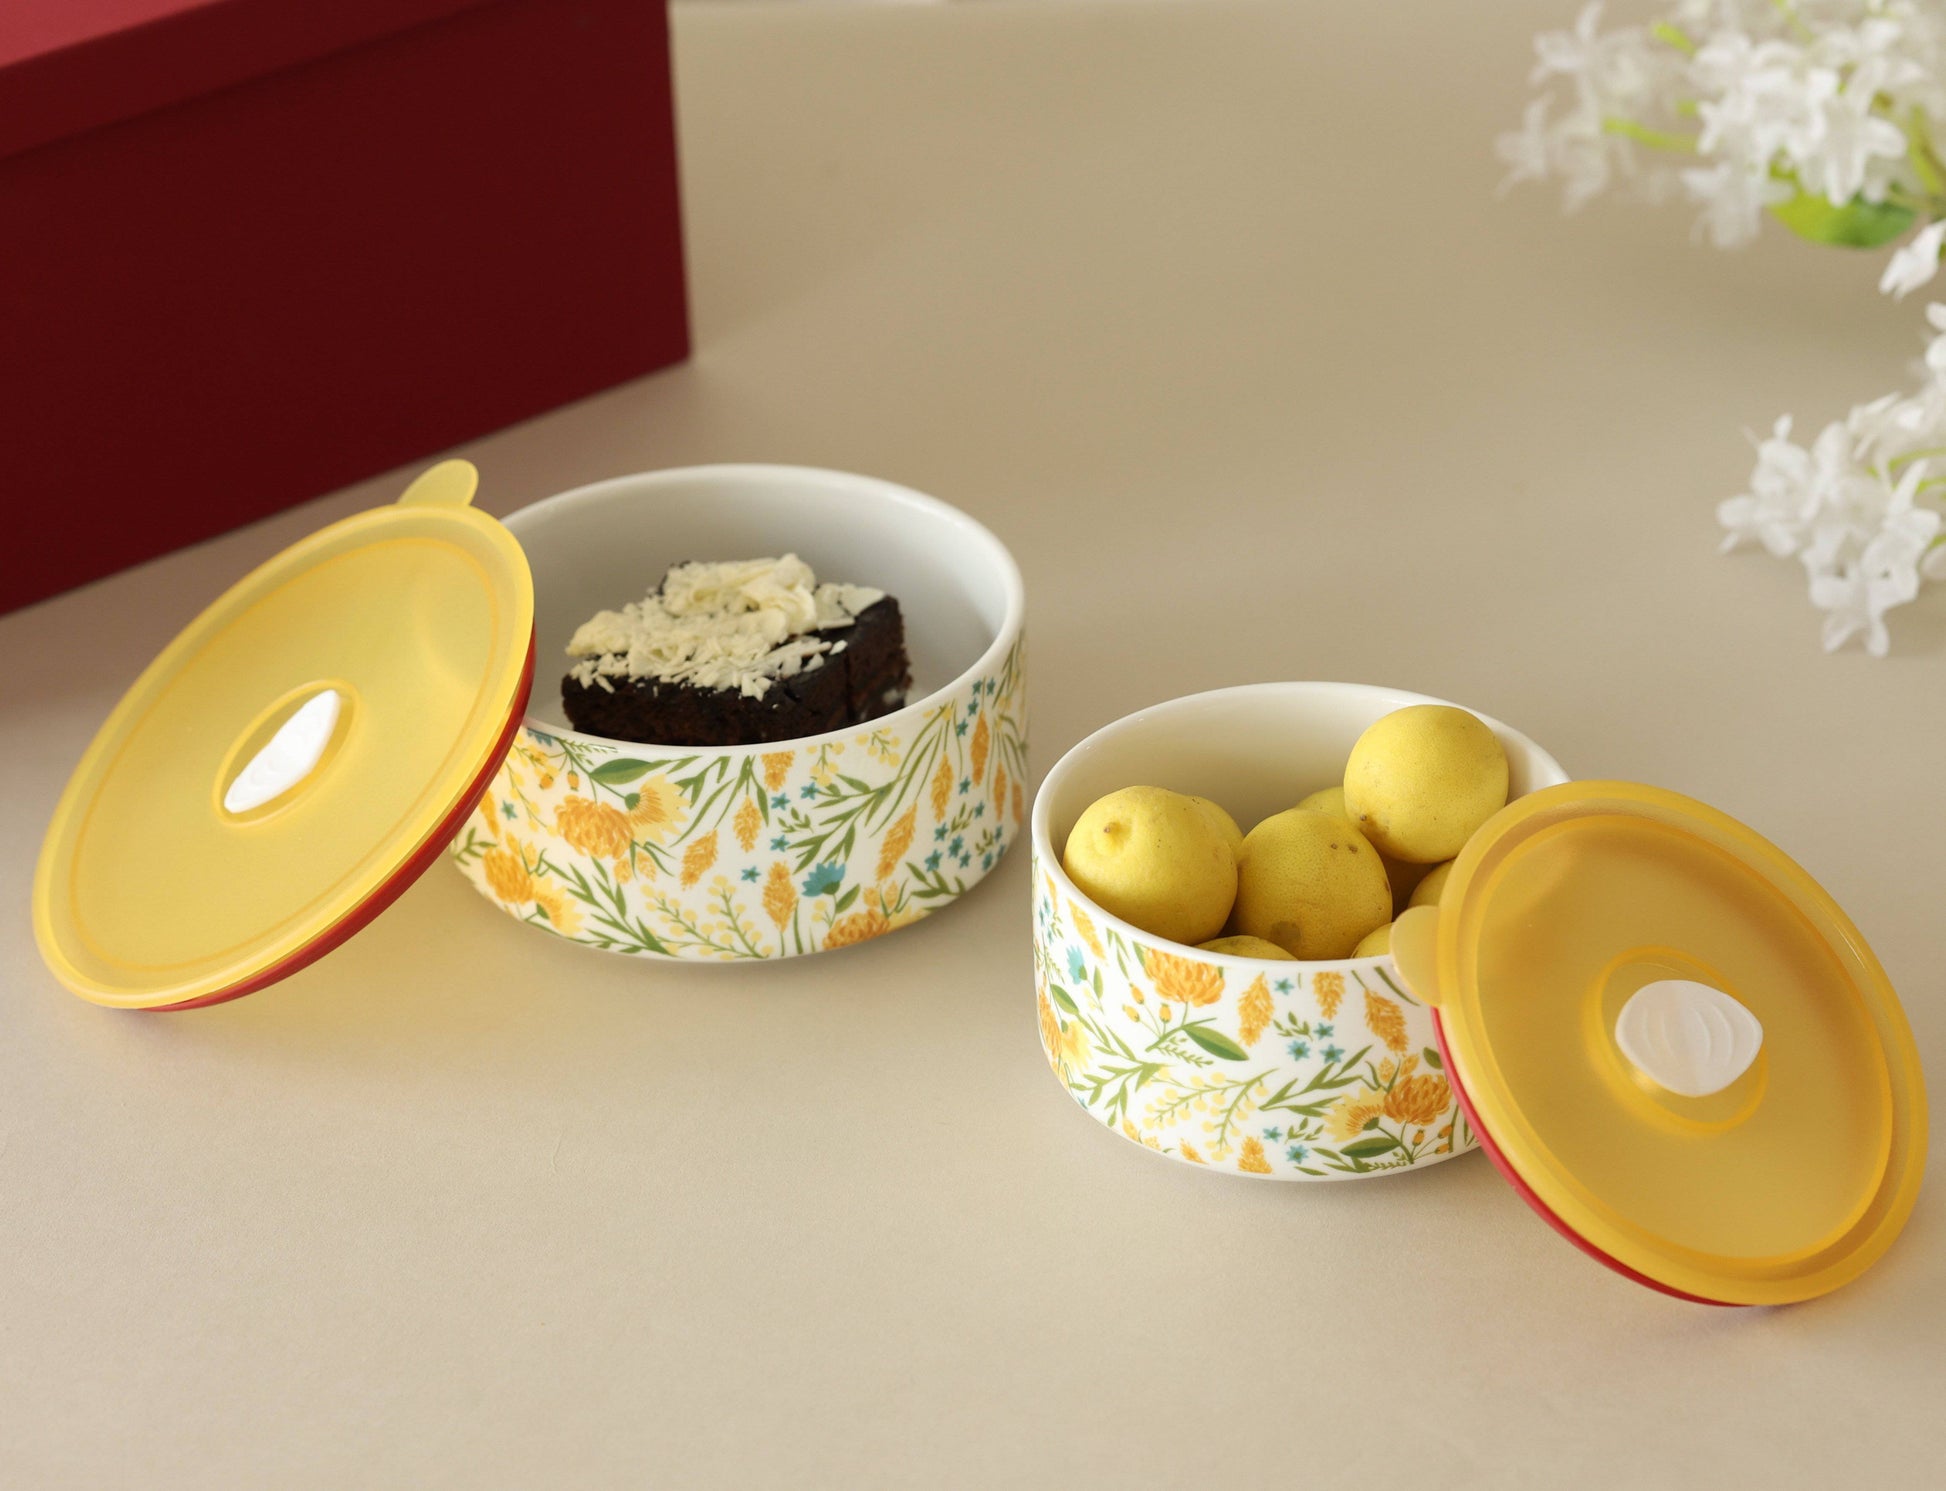 Decorative Yellow Storage bowl with Lid